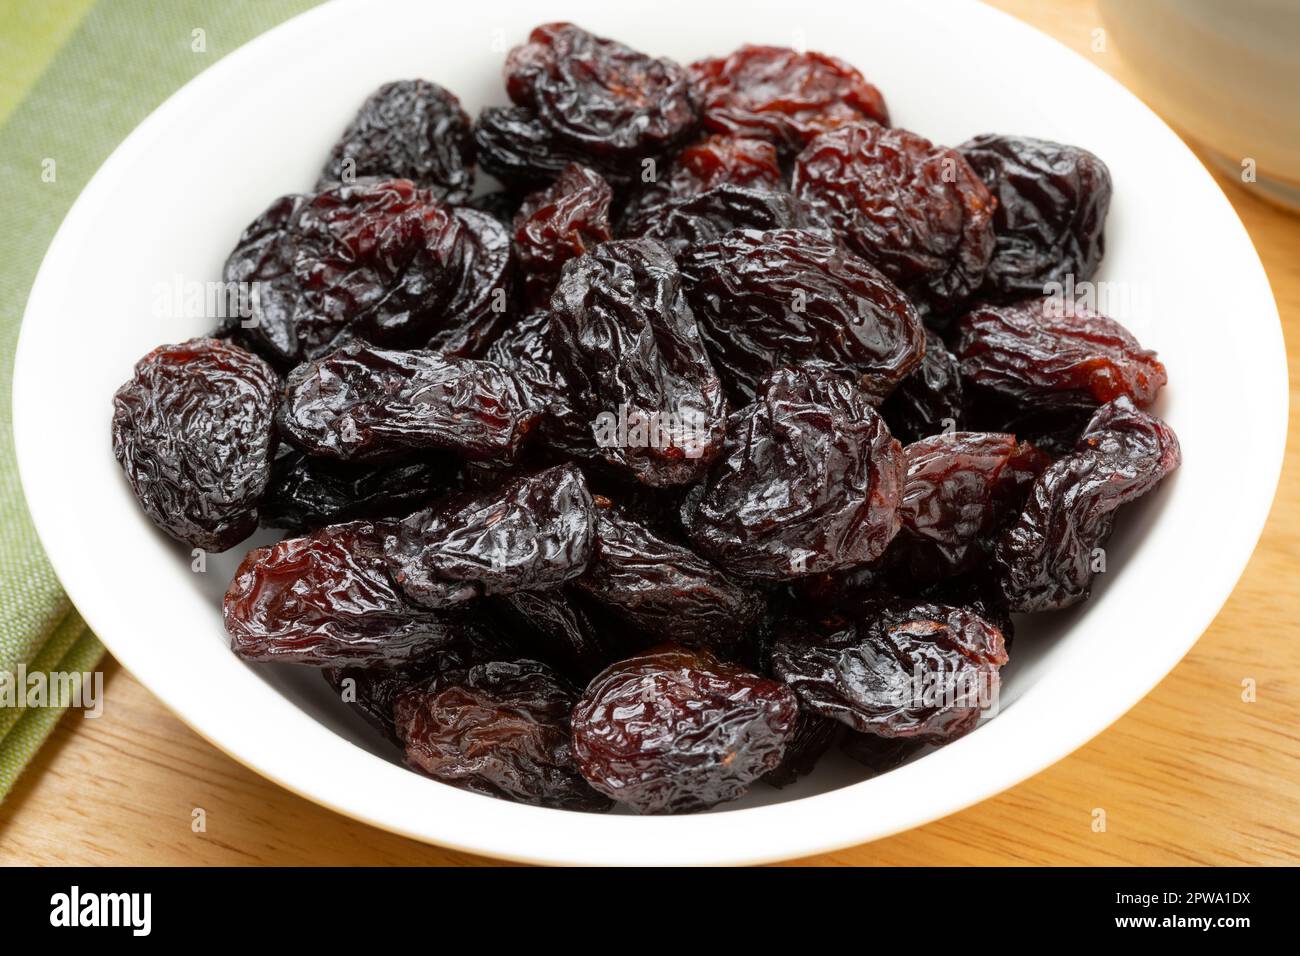 White bowl with large black flame raisins from Chile close up Stock Photo